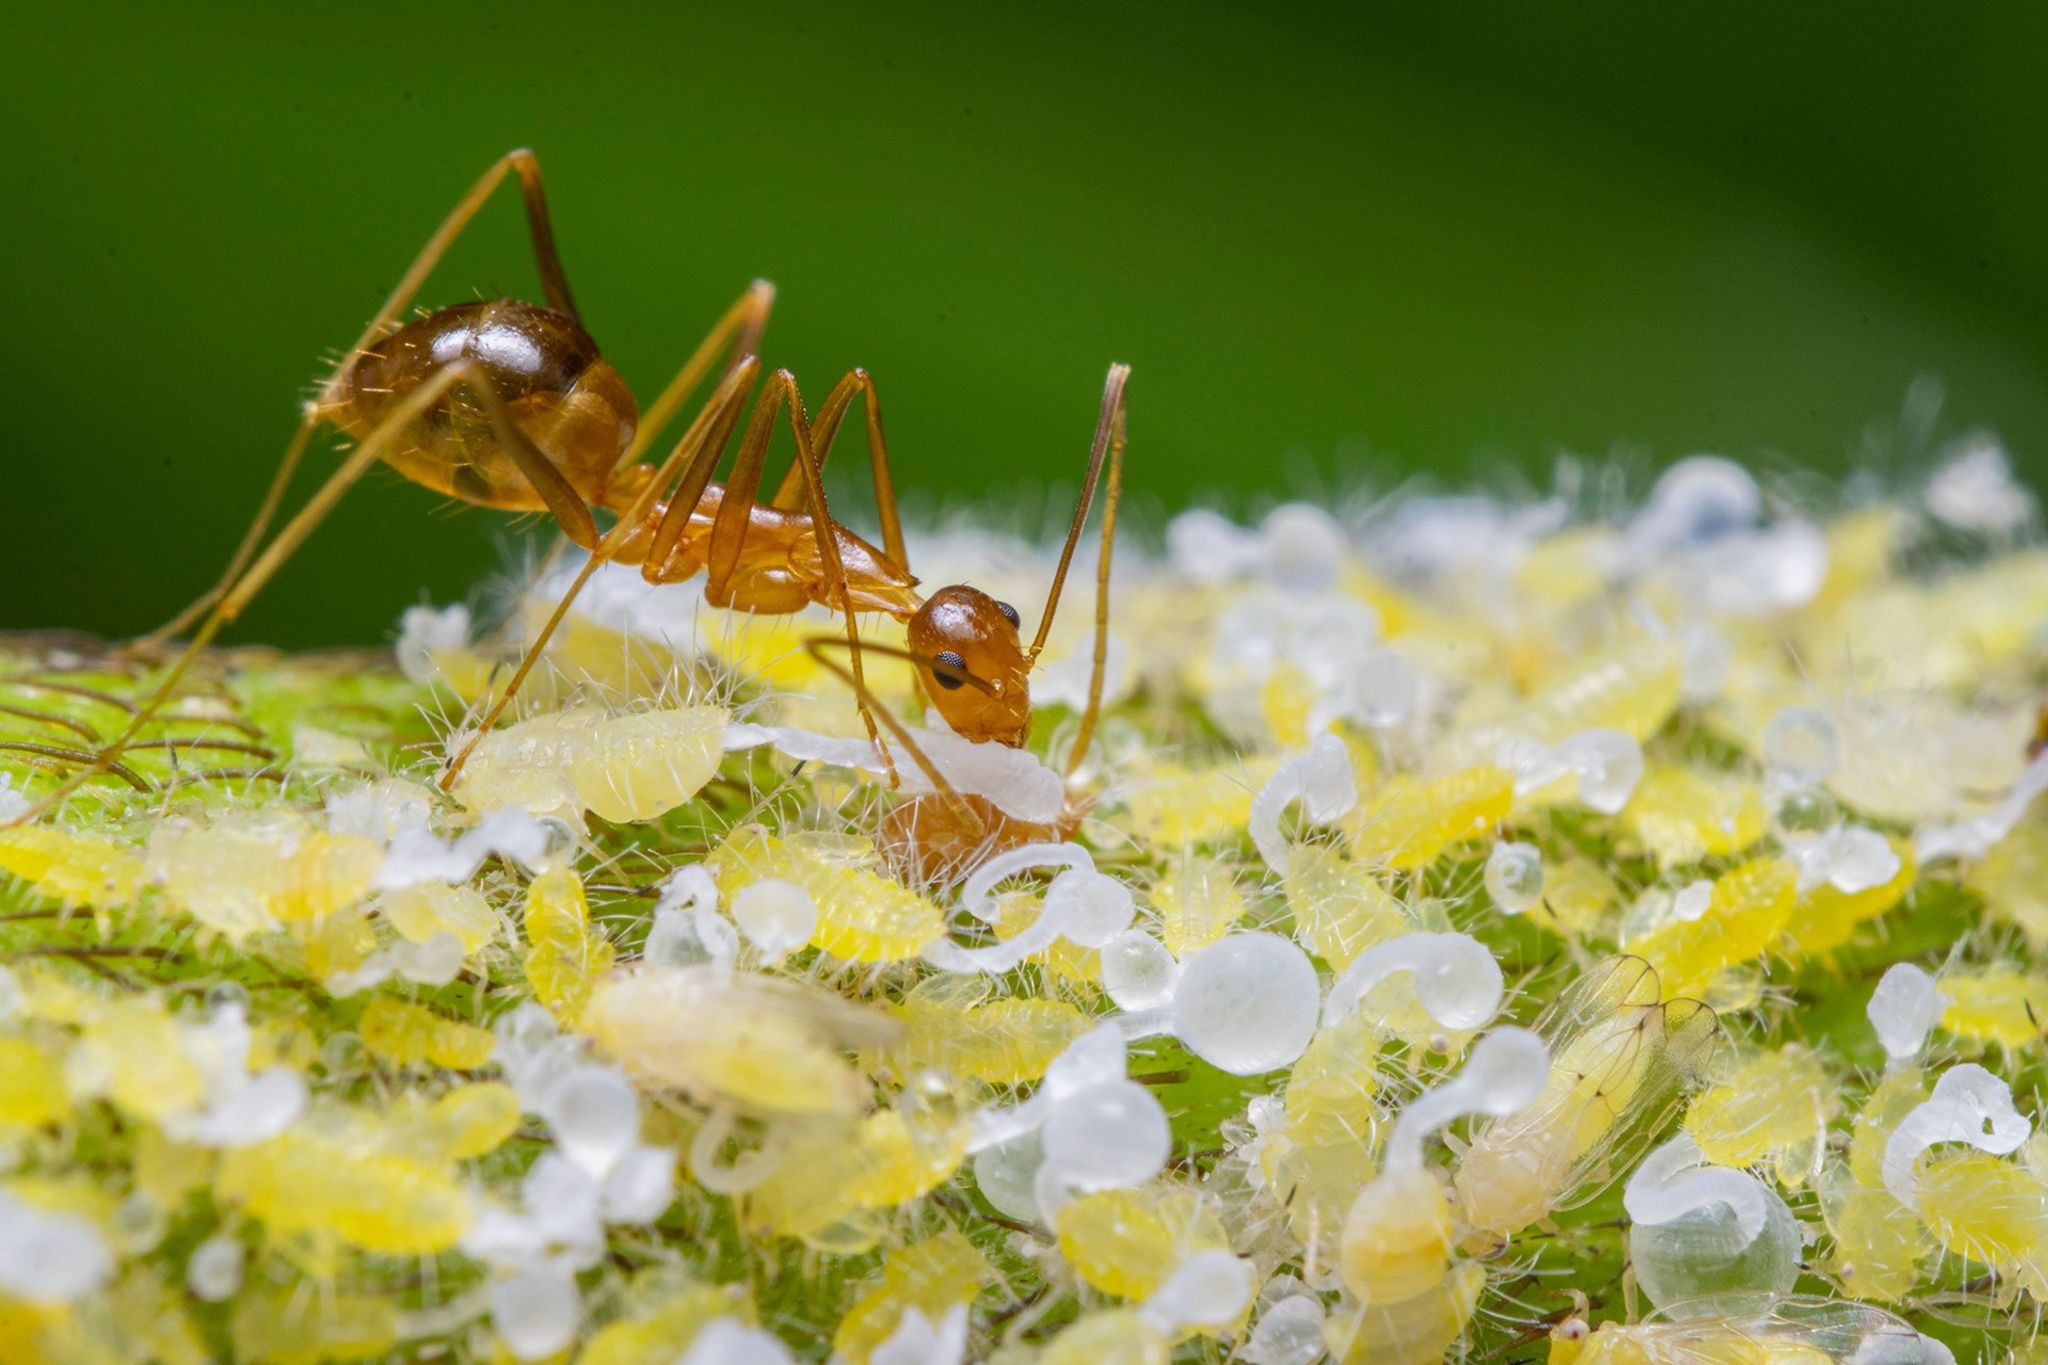 An ant and honeydew secreting aphids